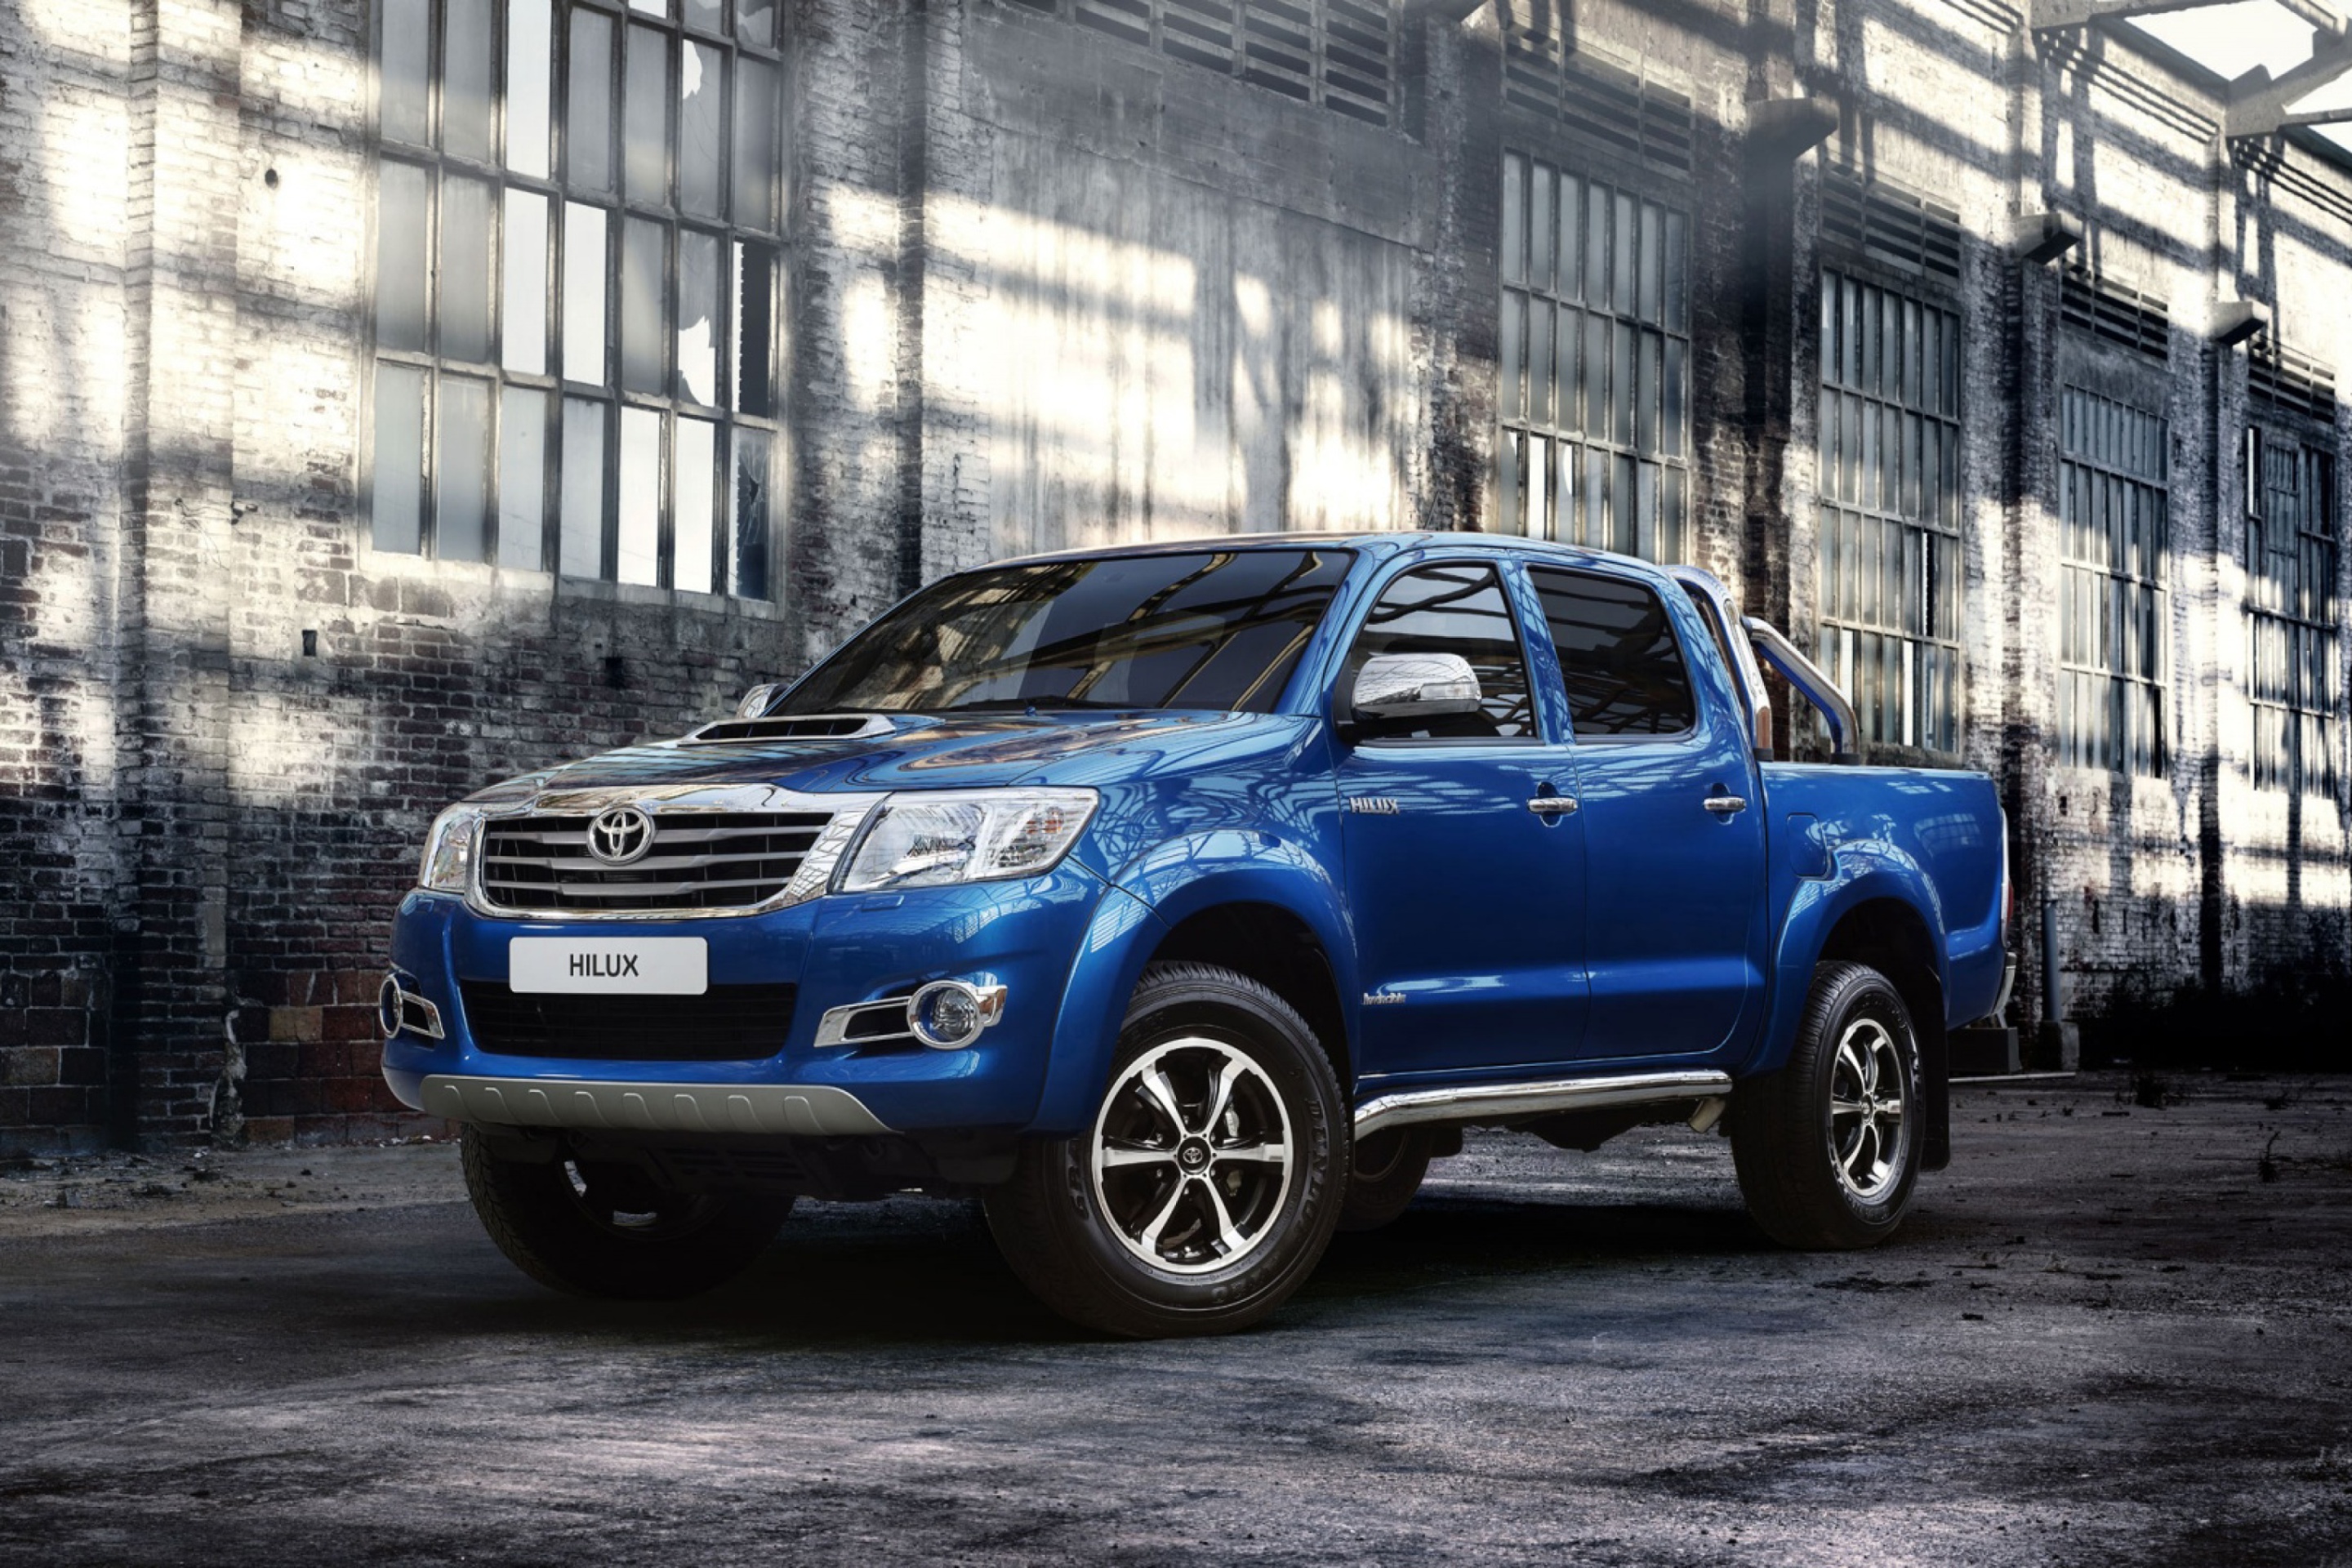 Toyota Hilux HDR wallpaper 2880x1920